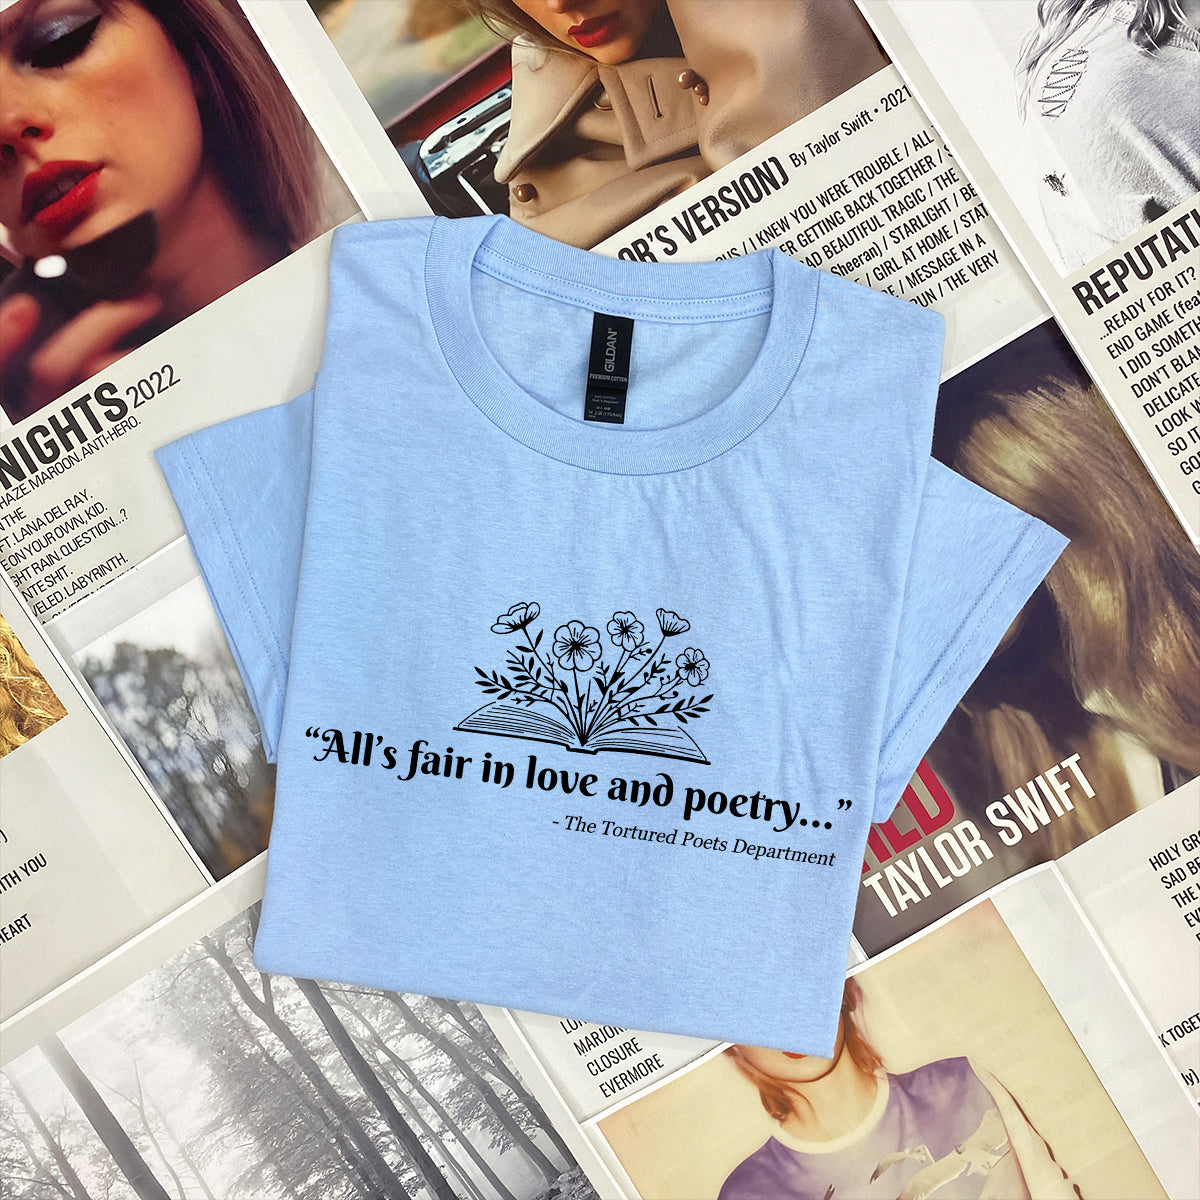 alls fair in love and poetry ttpd book flowers shirt 1713152145362.jpg